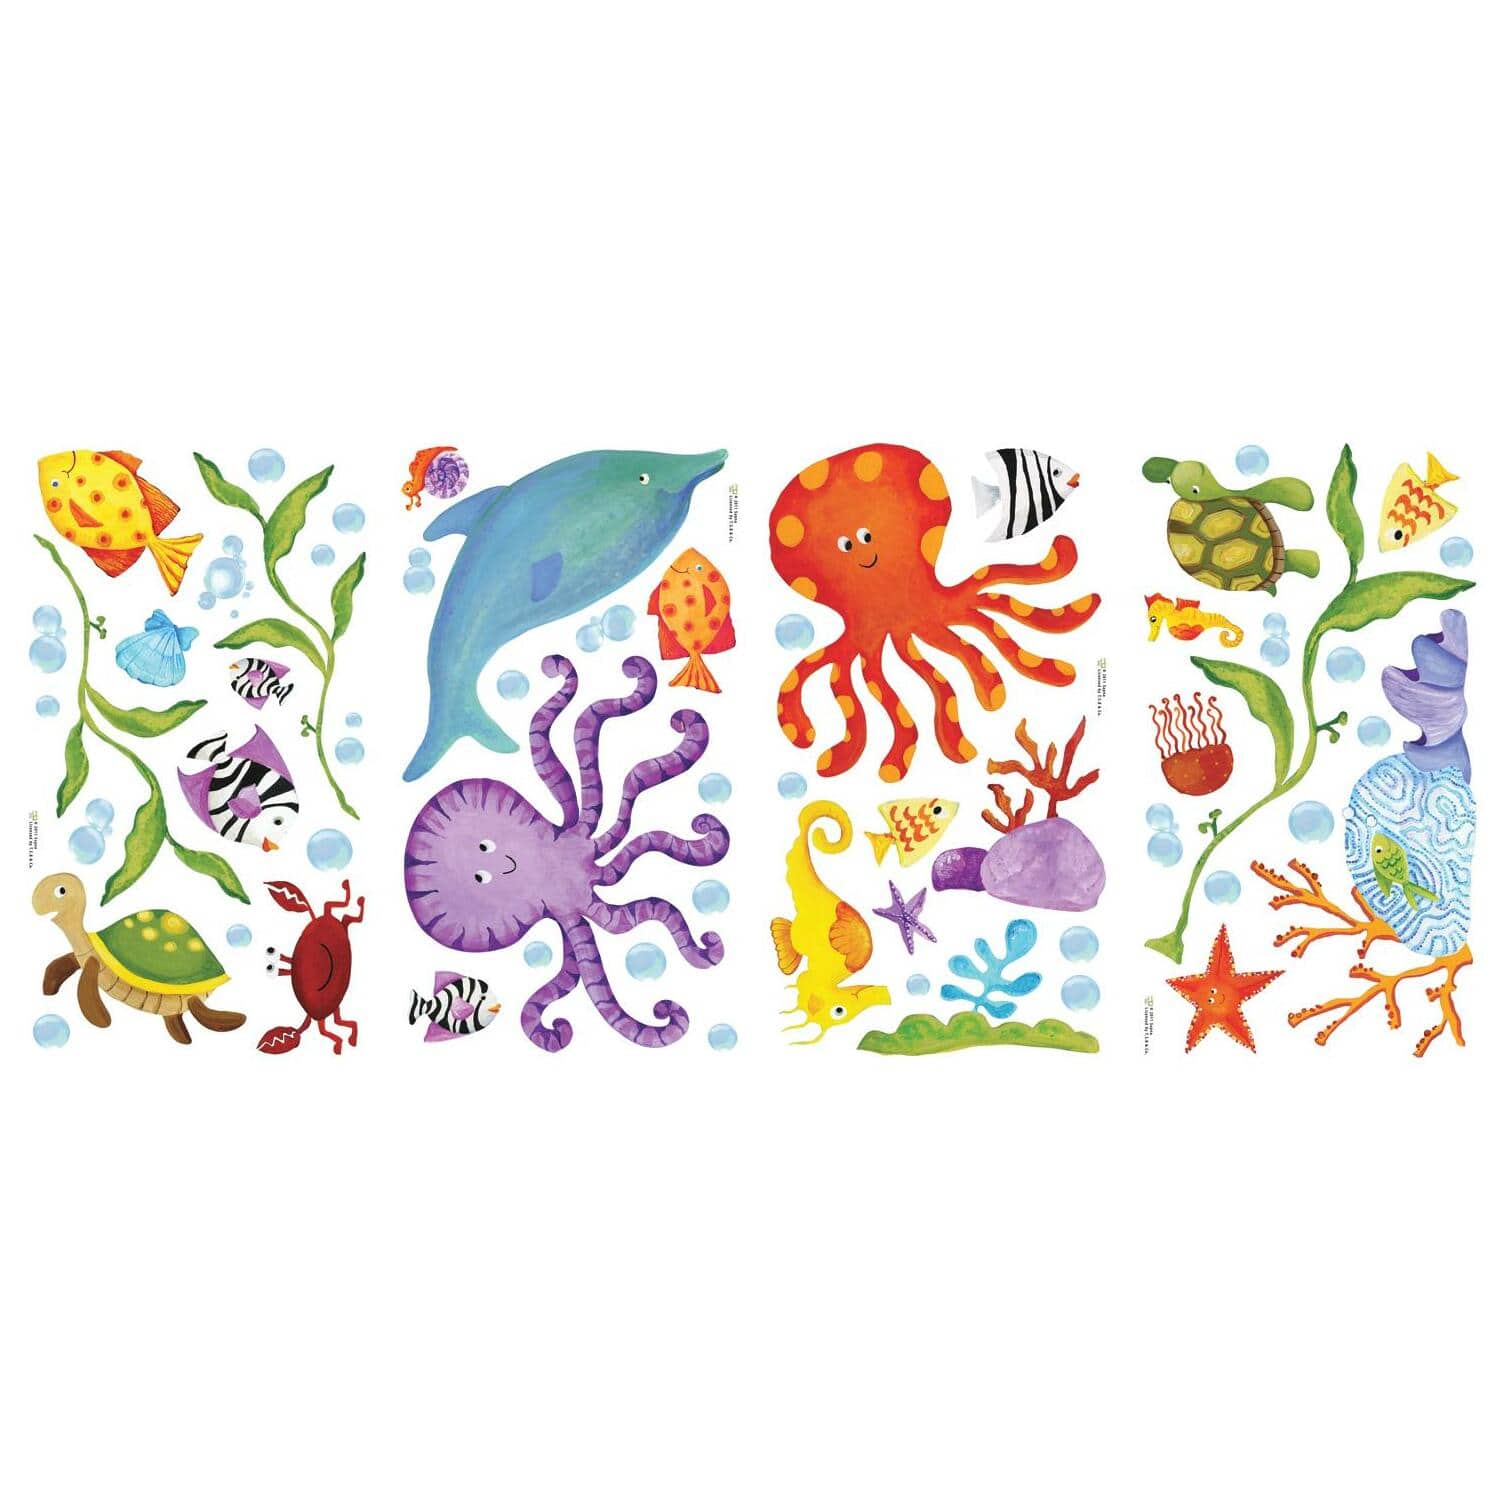 Adventures Under the Sea Decals Wall Stickers OCEAN Peel and Stick Decor New 